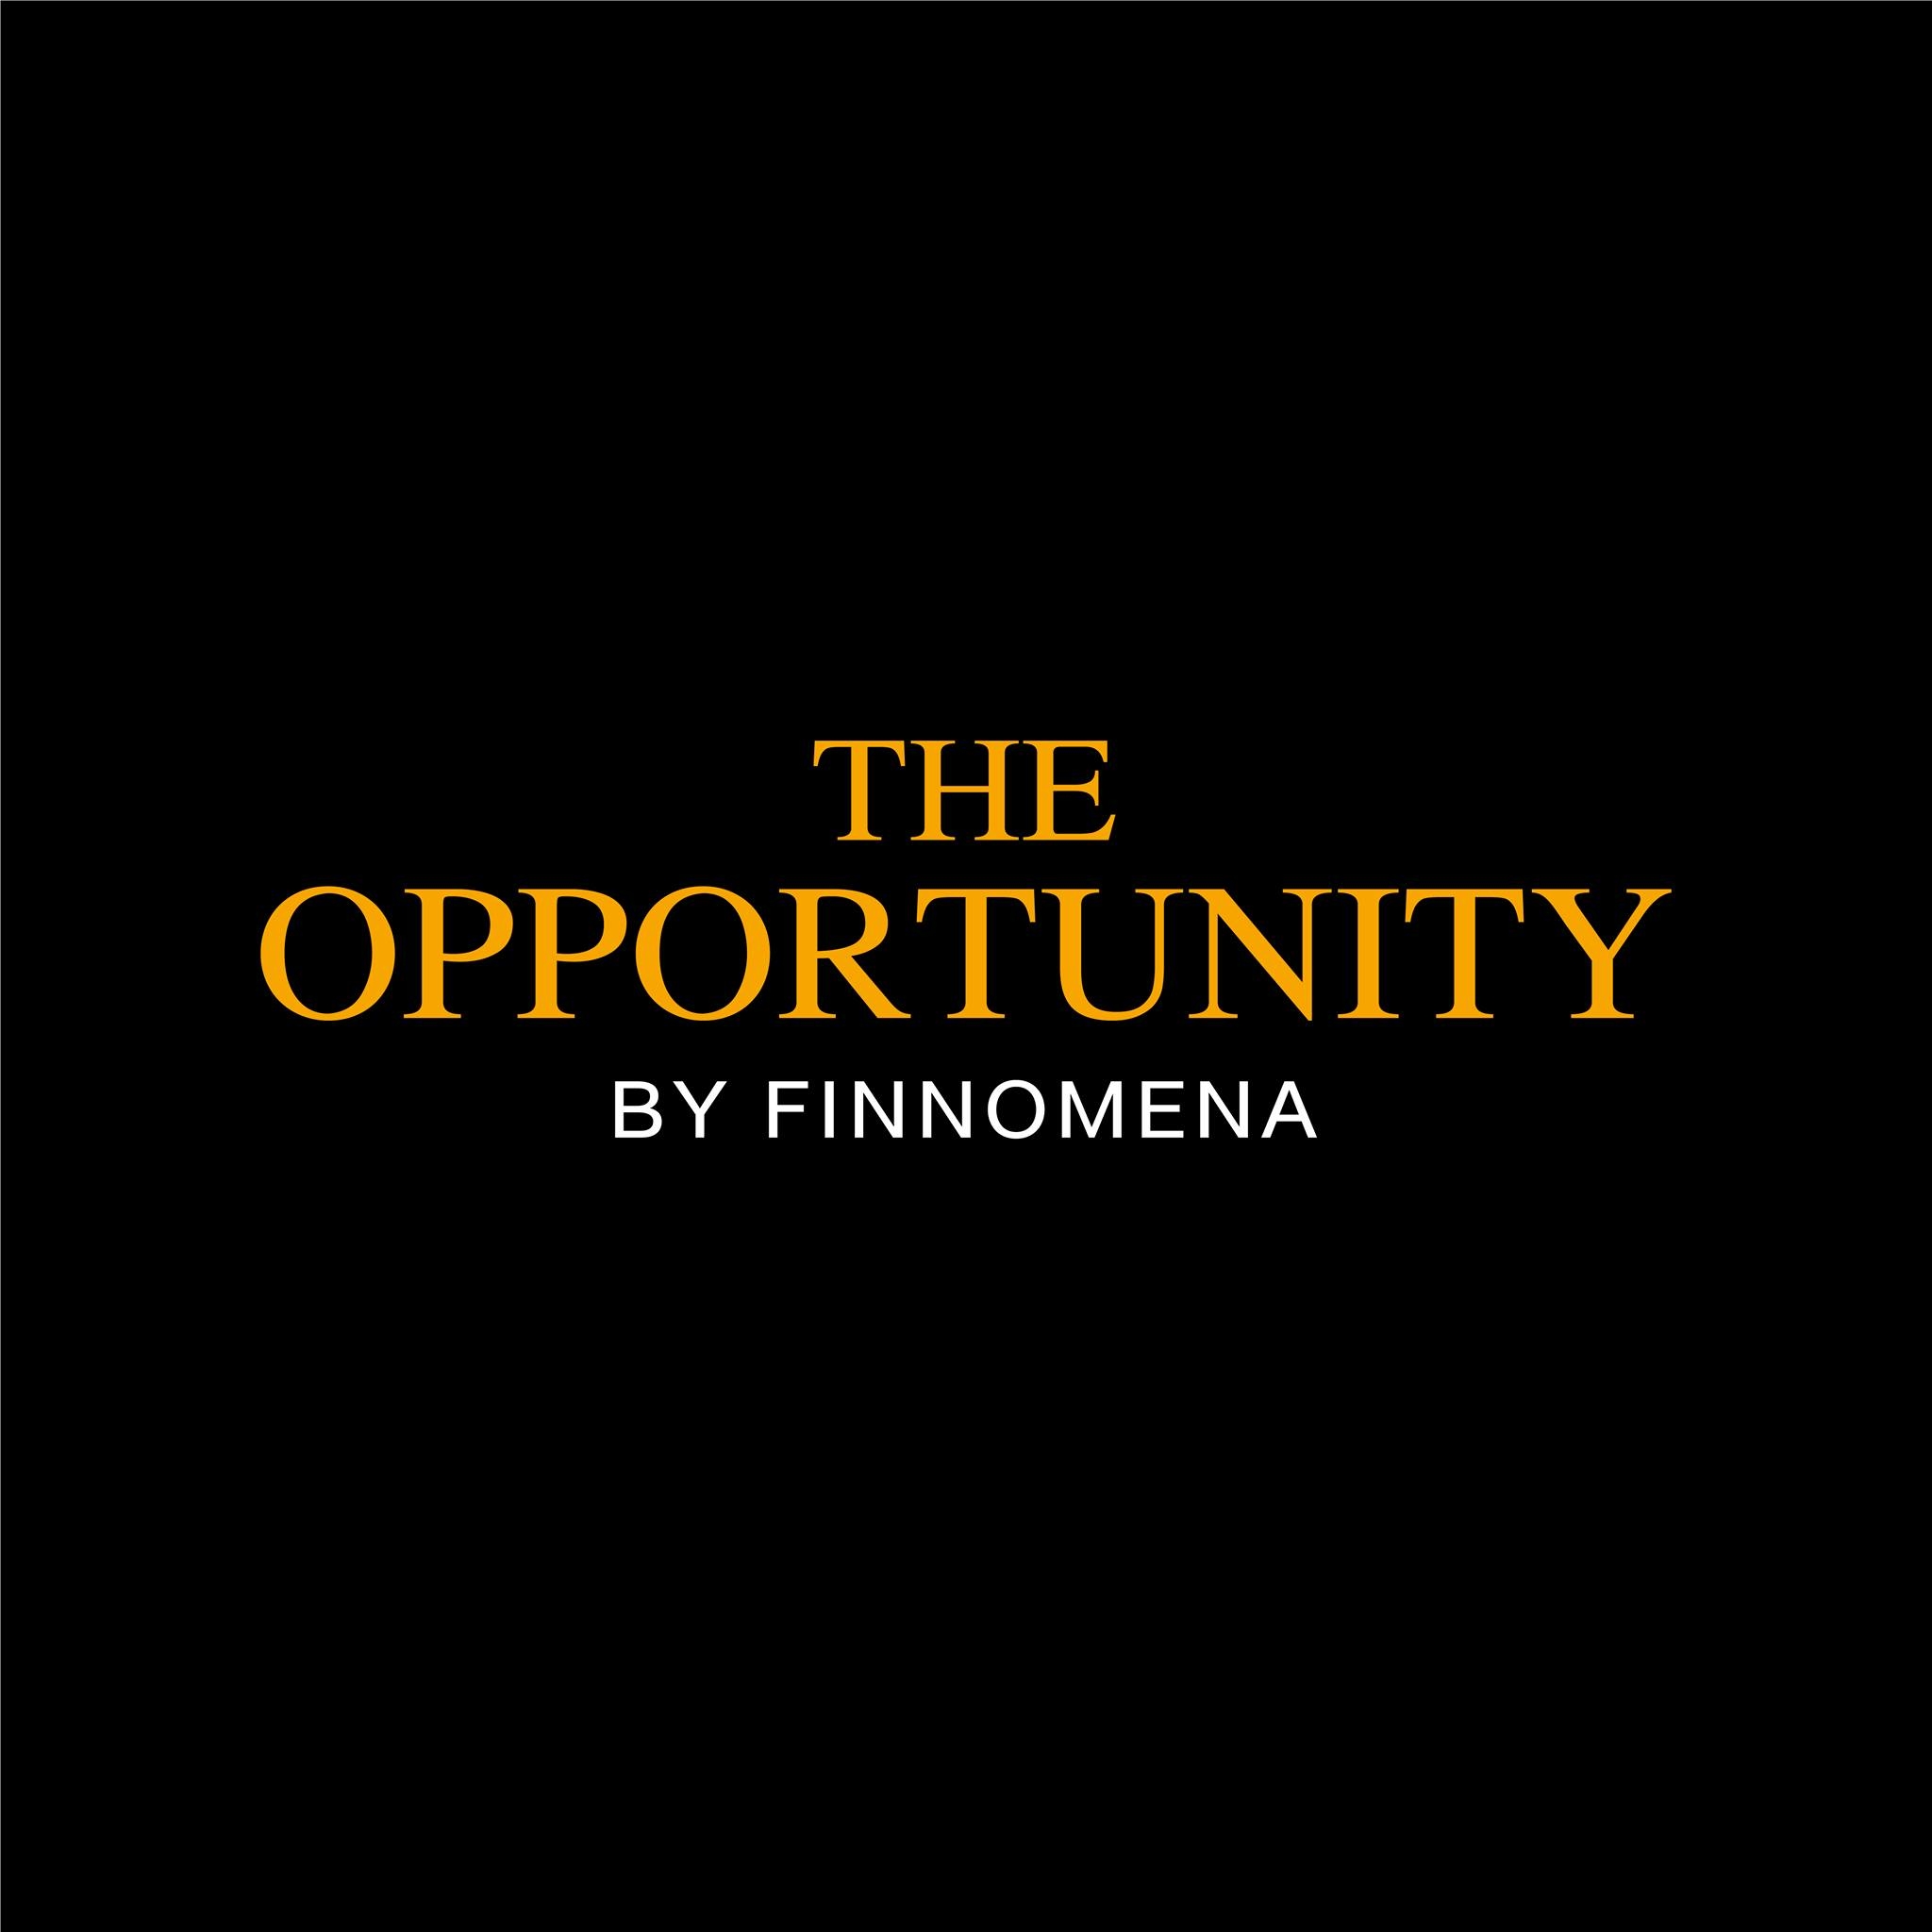 THE OPPORTUNITY